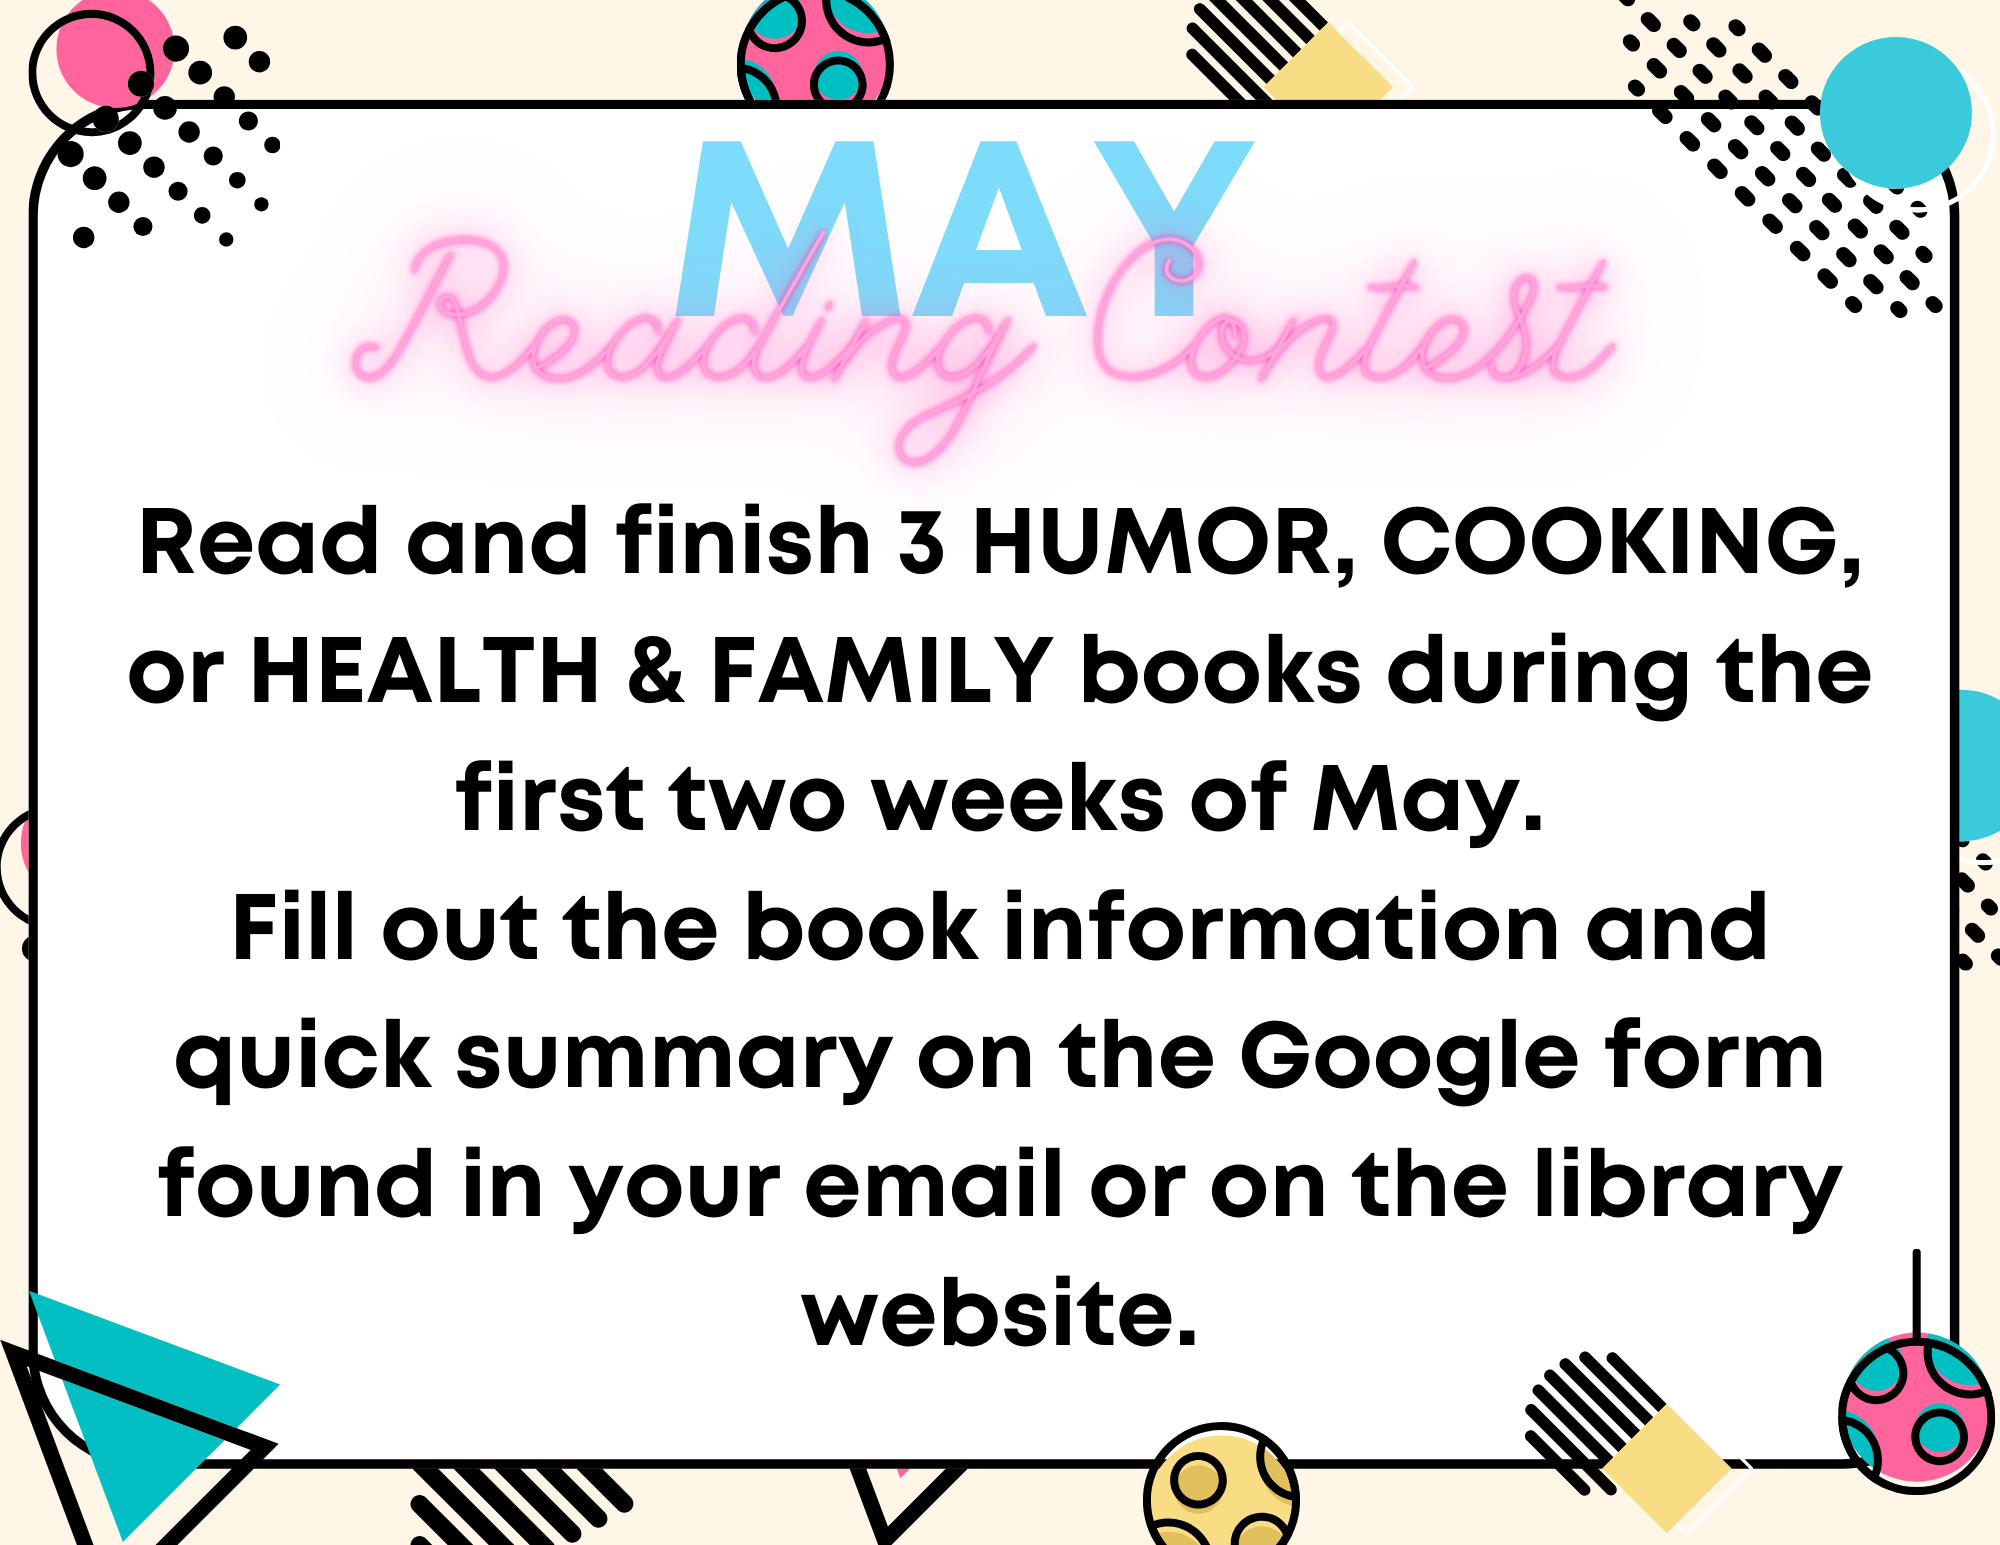 May Reading Contest